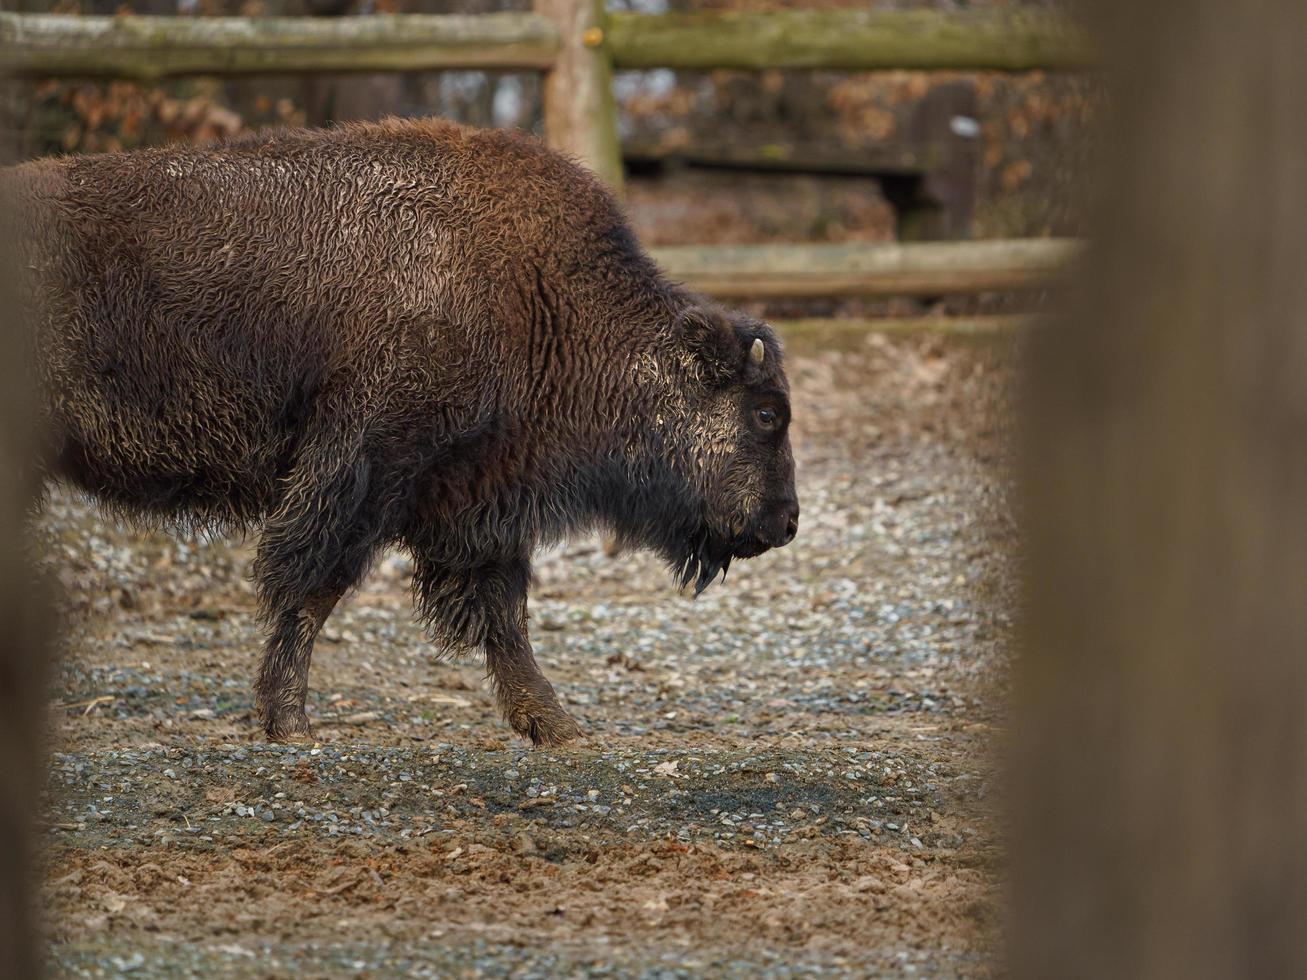 American bison in zoo photo